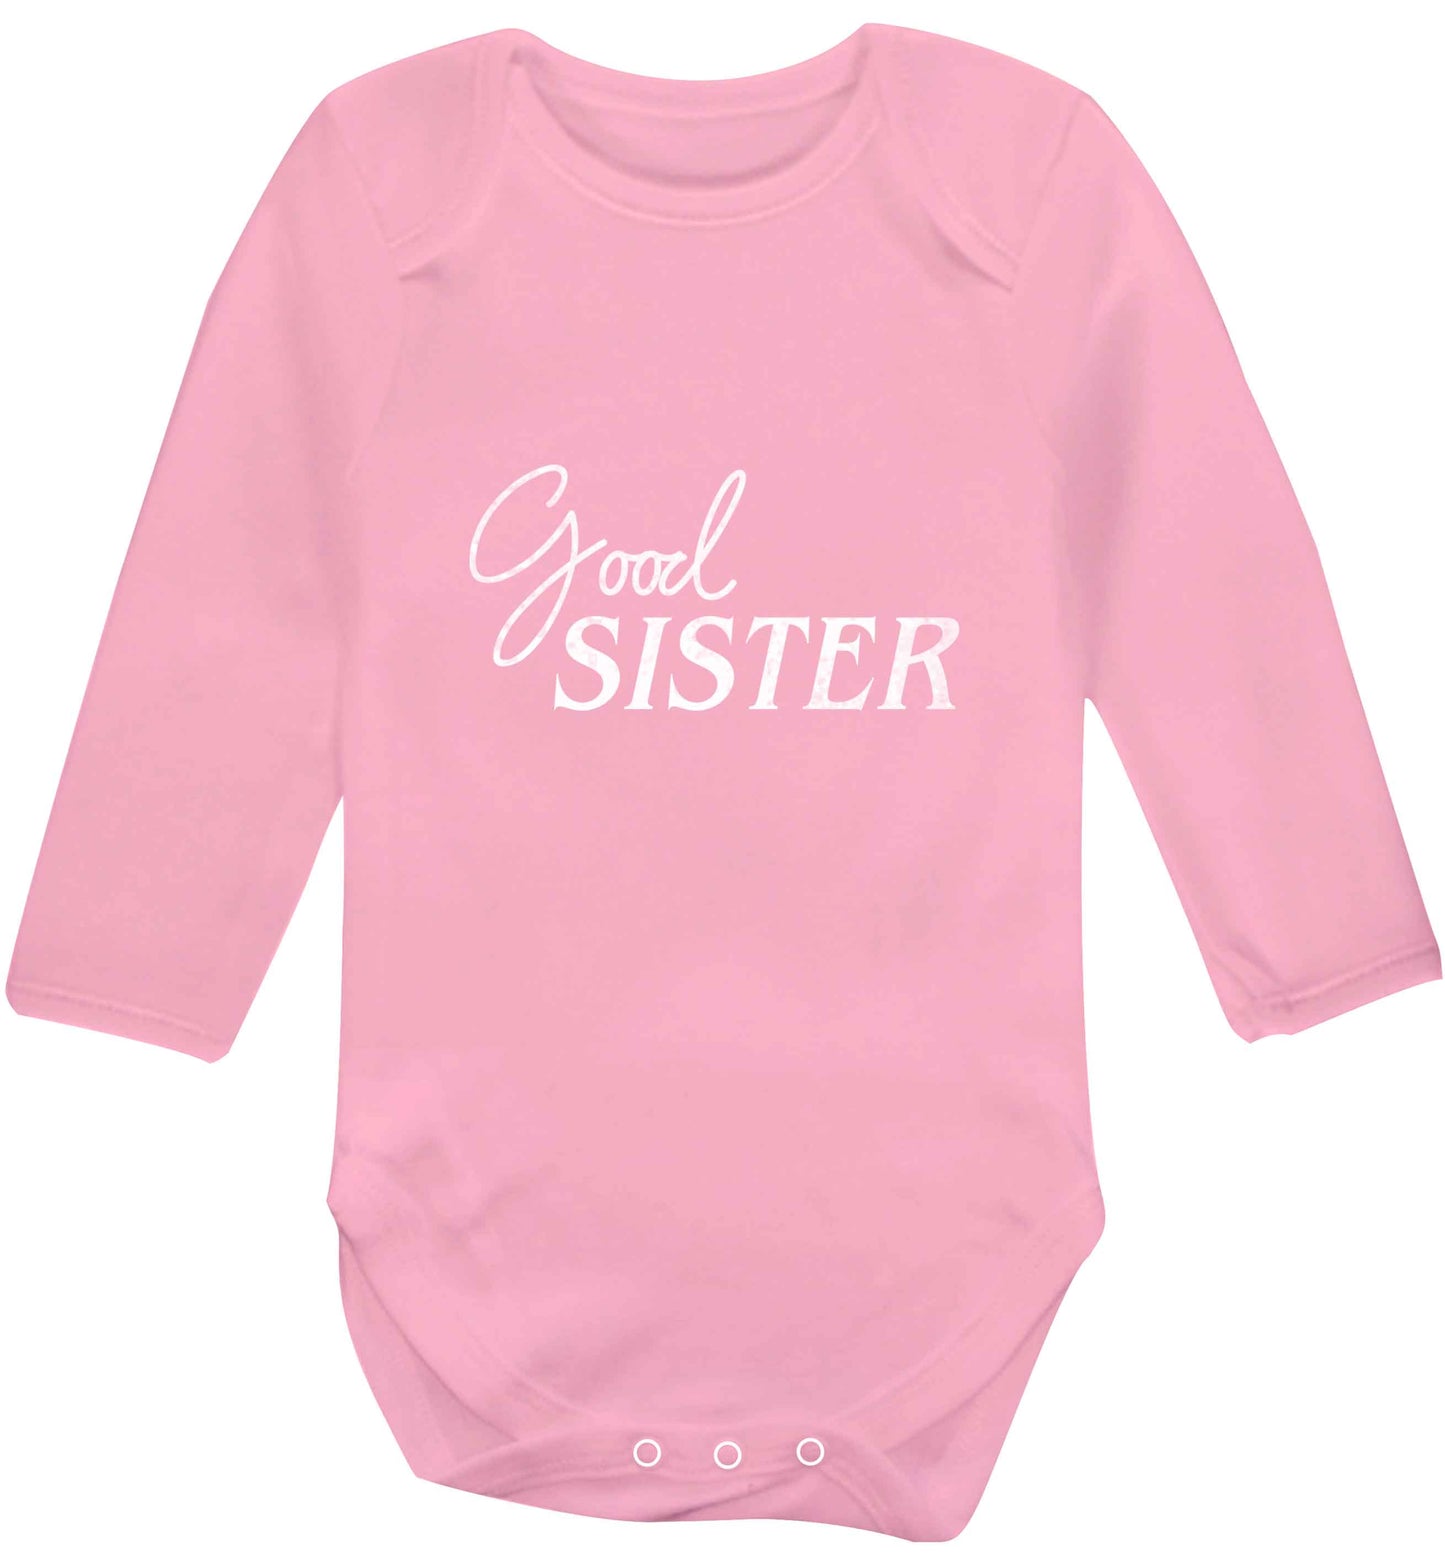 Good sister baby vest long sleeved pale pink 6-12 months